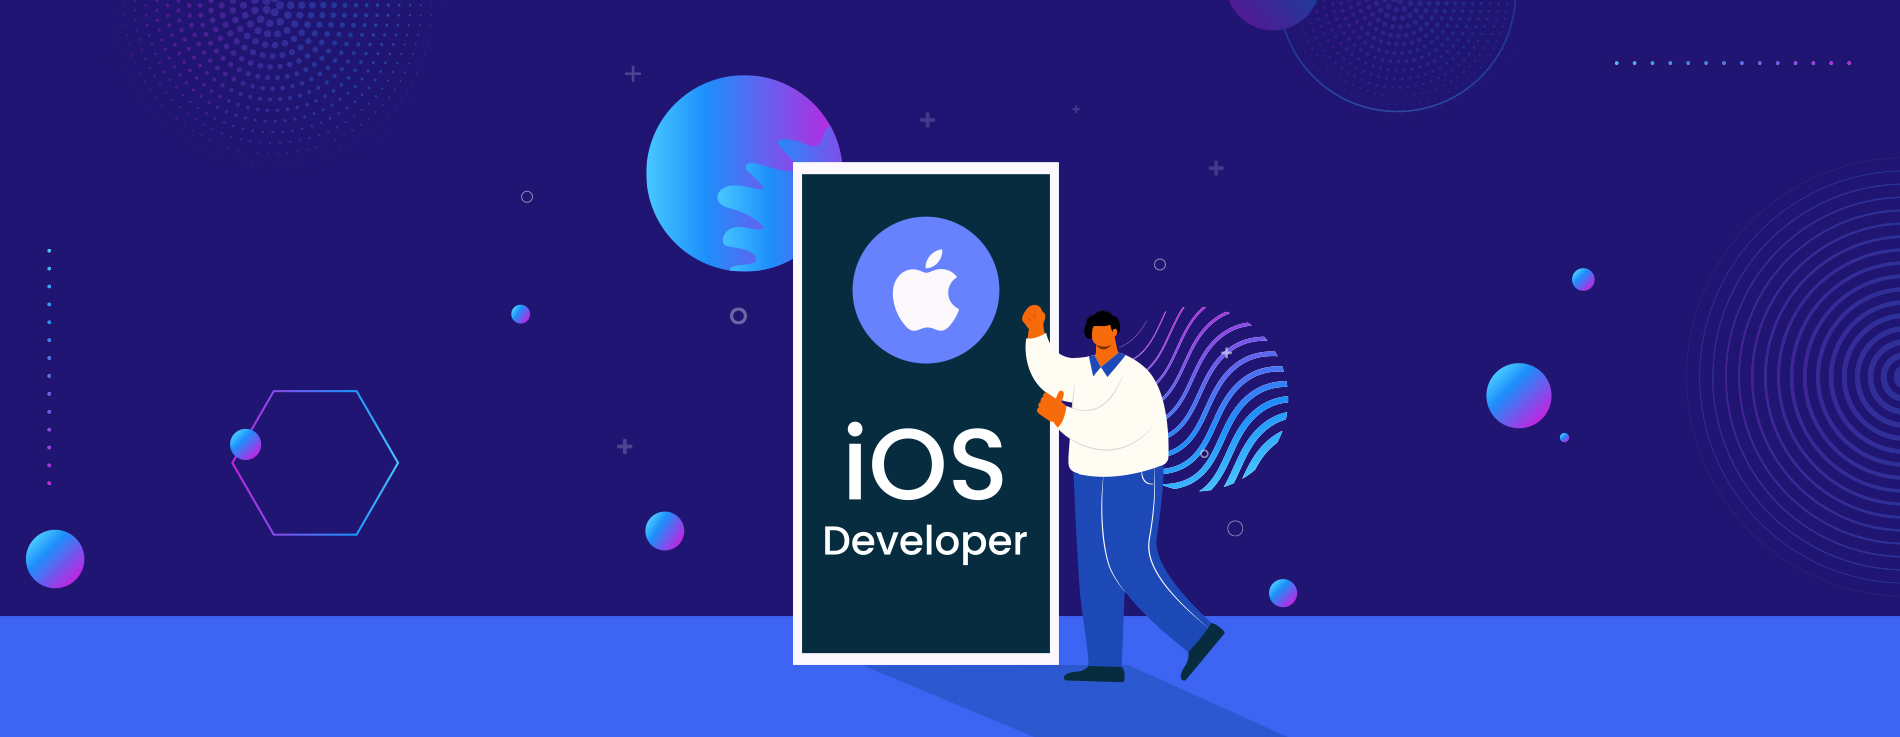 How to Find and Hire iOS Developers?